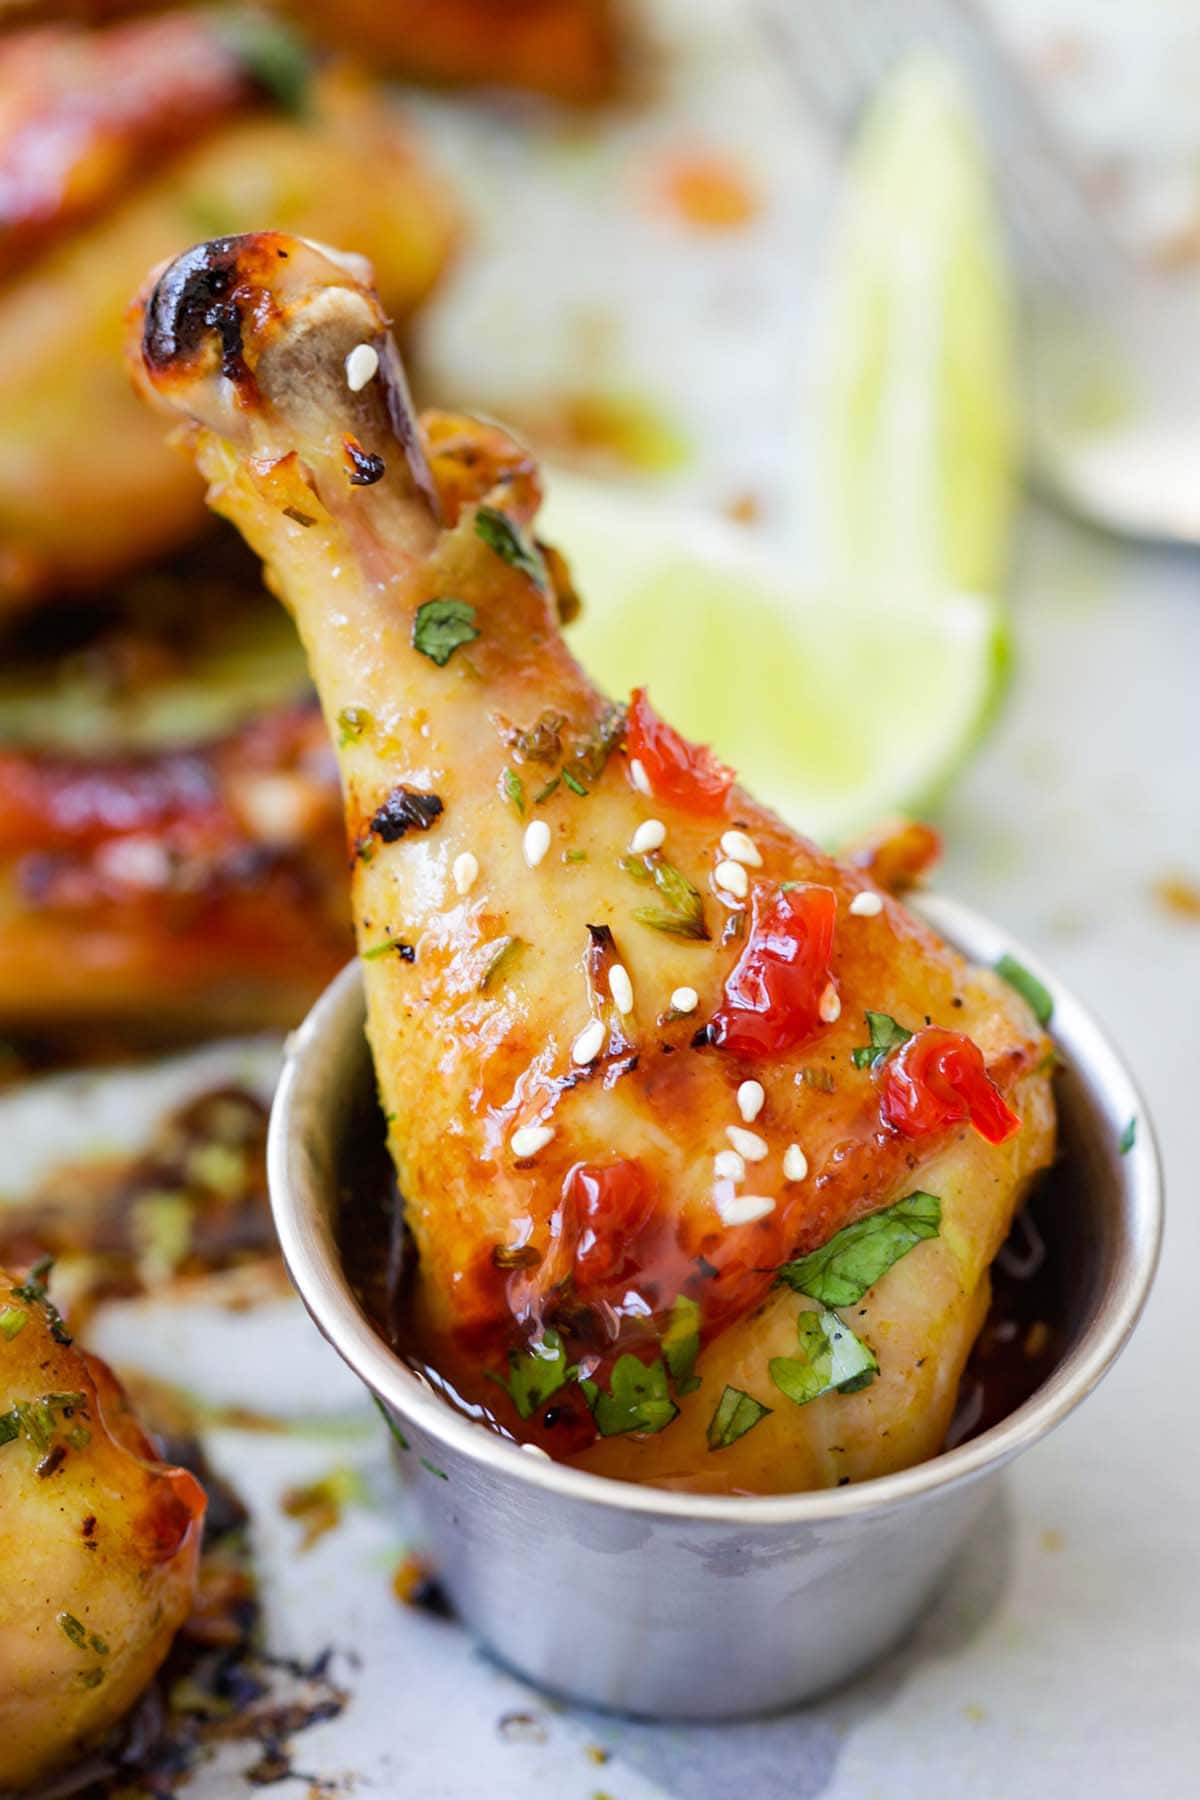 A chicken drumsticks dipped in Thai sweet chili sauce.